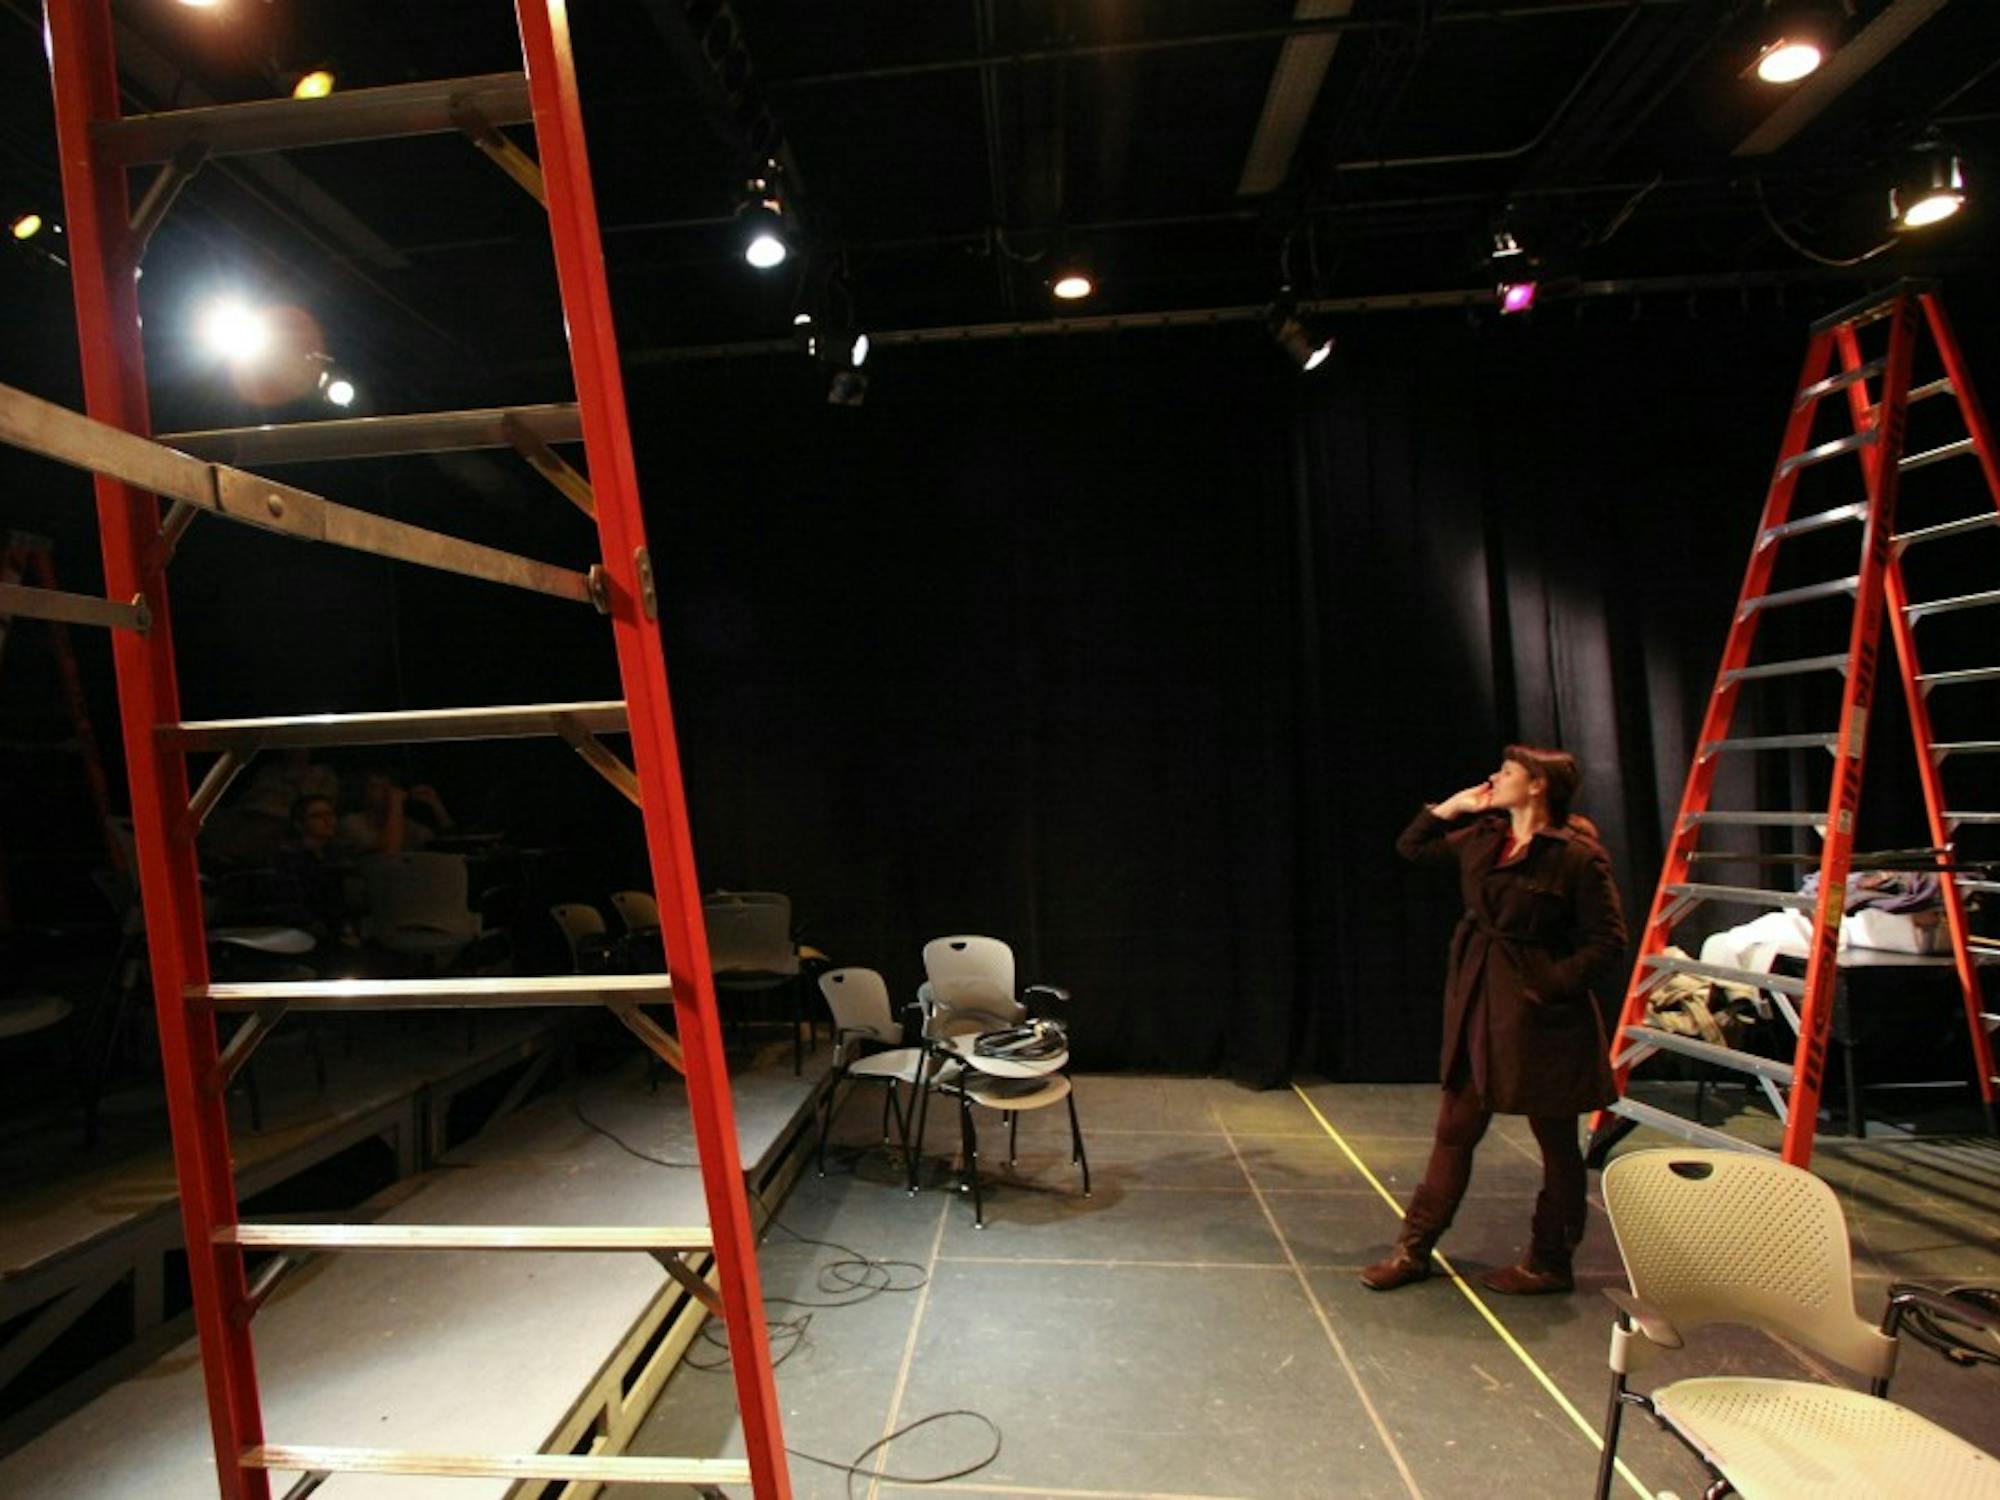 The entire staff of the production worked together to get the show up and running for viewing, here staff is seen setting up the lights and doing checking to see if the light positioning is correct.